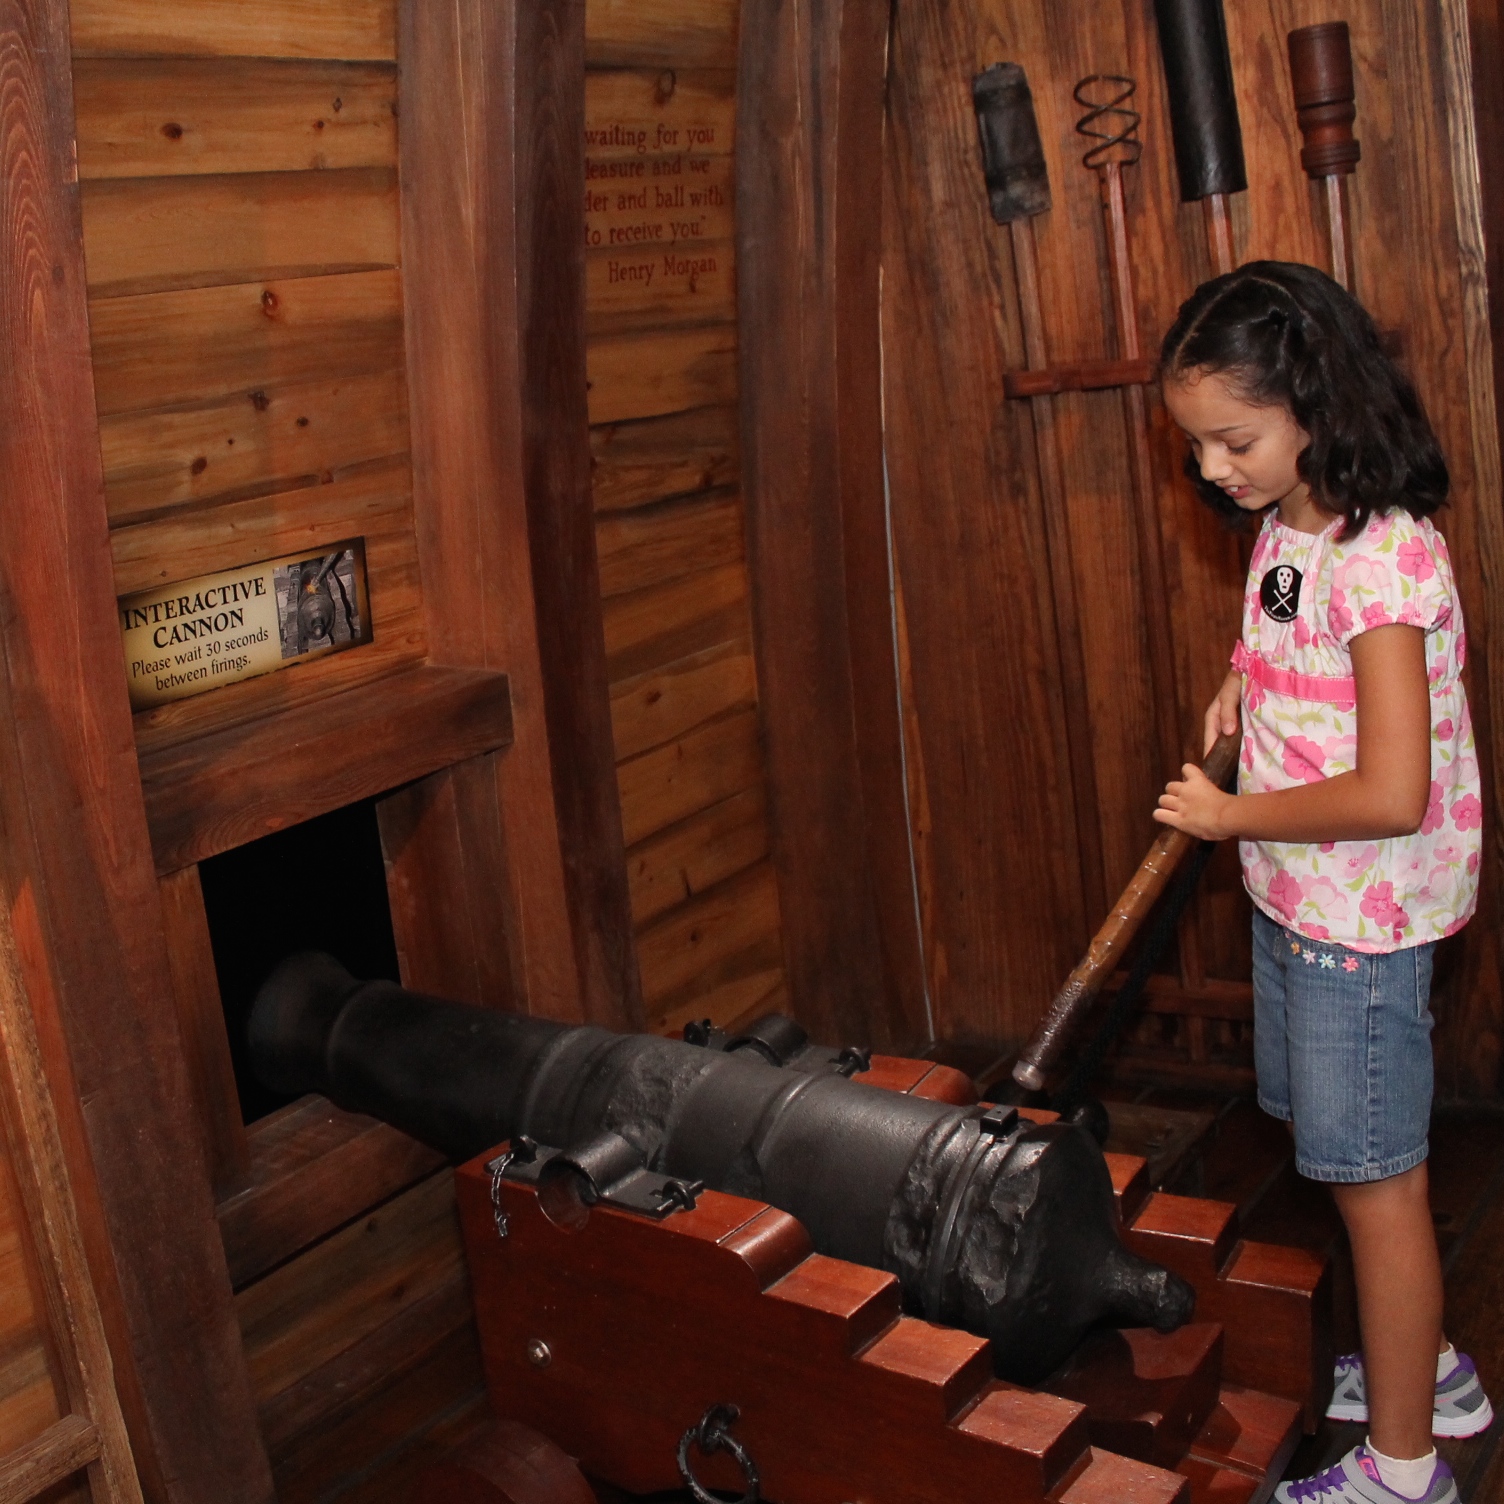 Interactive Exhibits at the Pirate and Treasure Museum in Saint Agustine